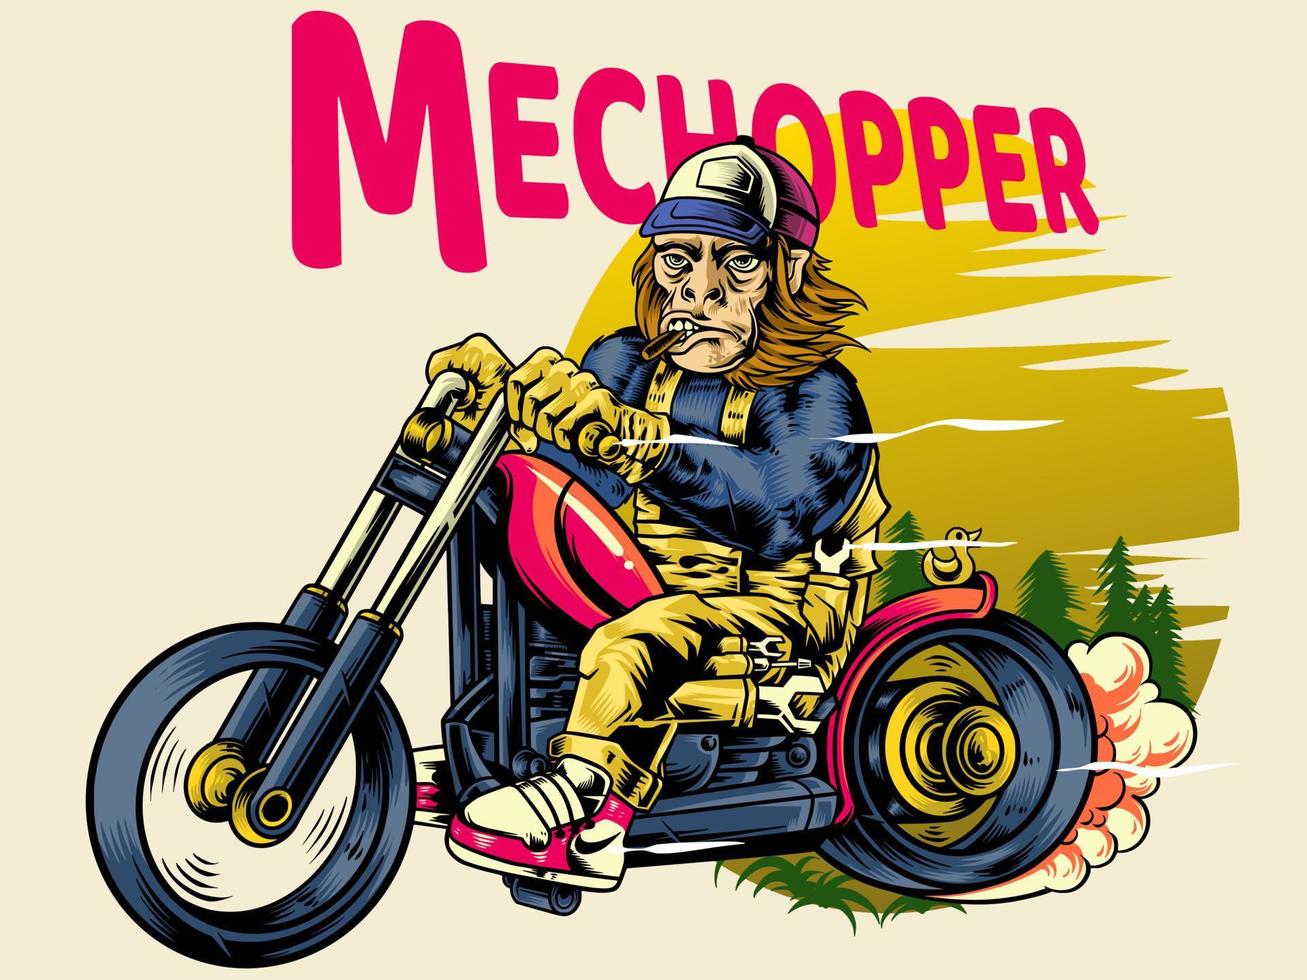 mechopper finishes work every holiday vector